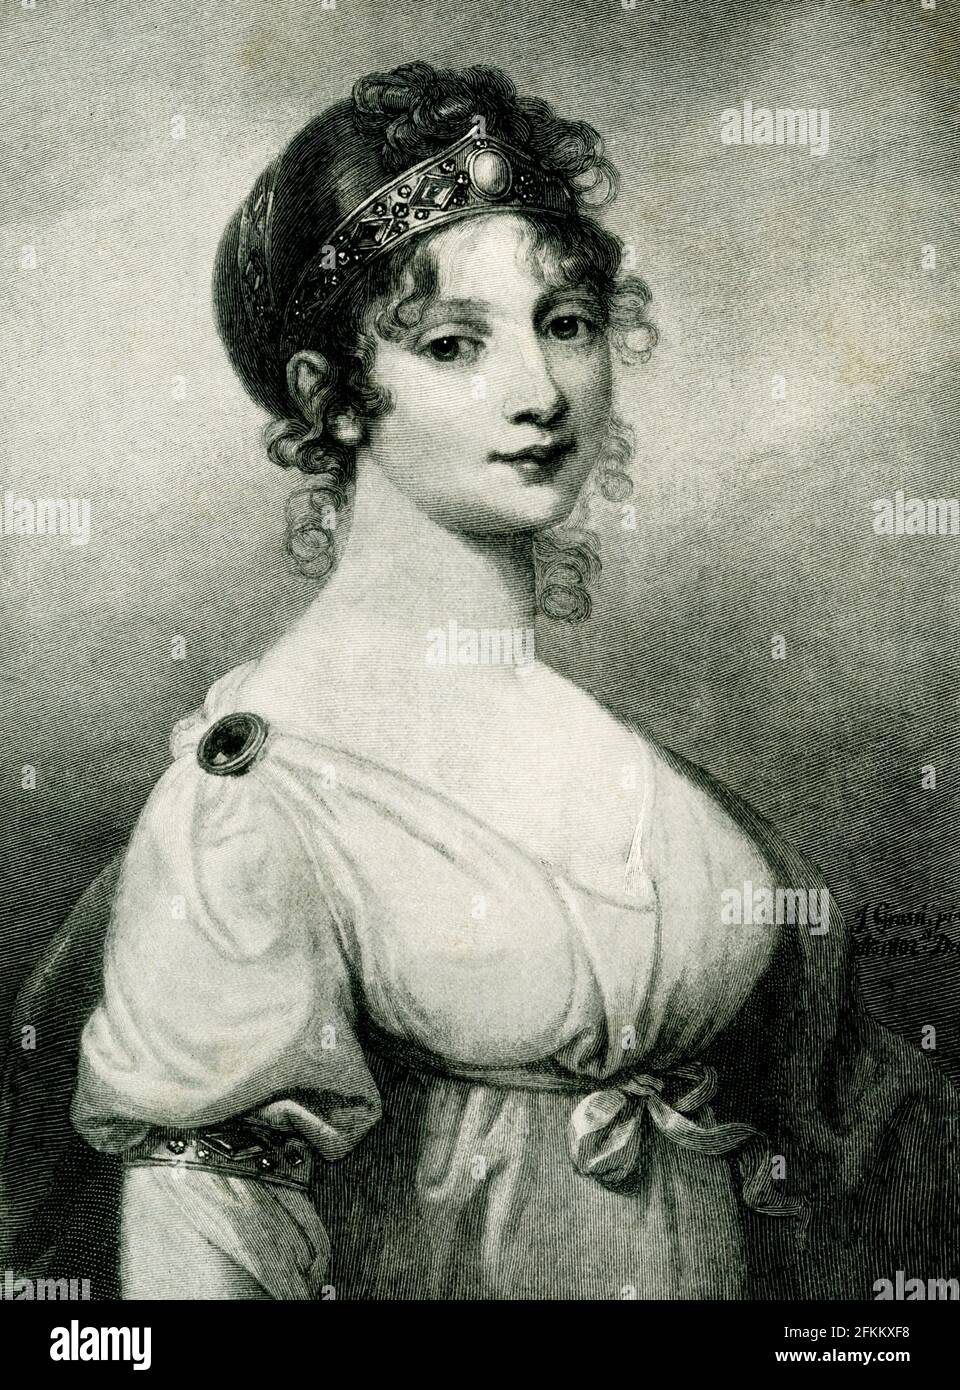 The 1896 caption reads: “Queen Louisa of Prussia from painting in Hohenzollern Museum in Berlin engraved by Varley on half-tone.” Louisa Ulrika of Prussia was Queen of Sweden from 1751 to 1771 as the consort of King Adolf Frederick. She was queen mother during the reign of King Gustav III. Stock Photo